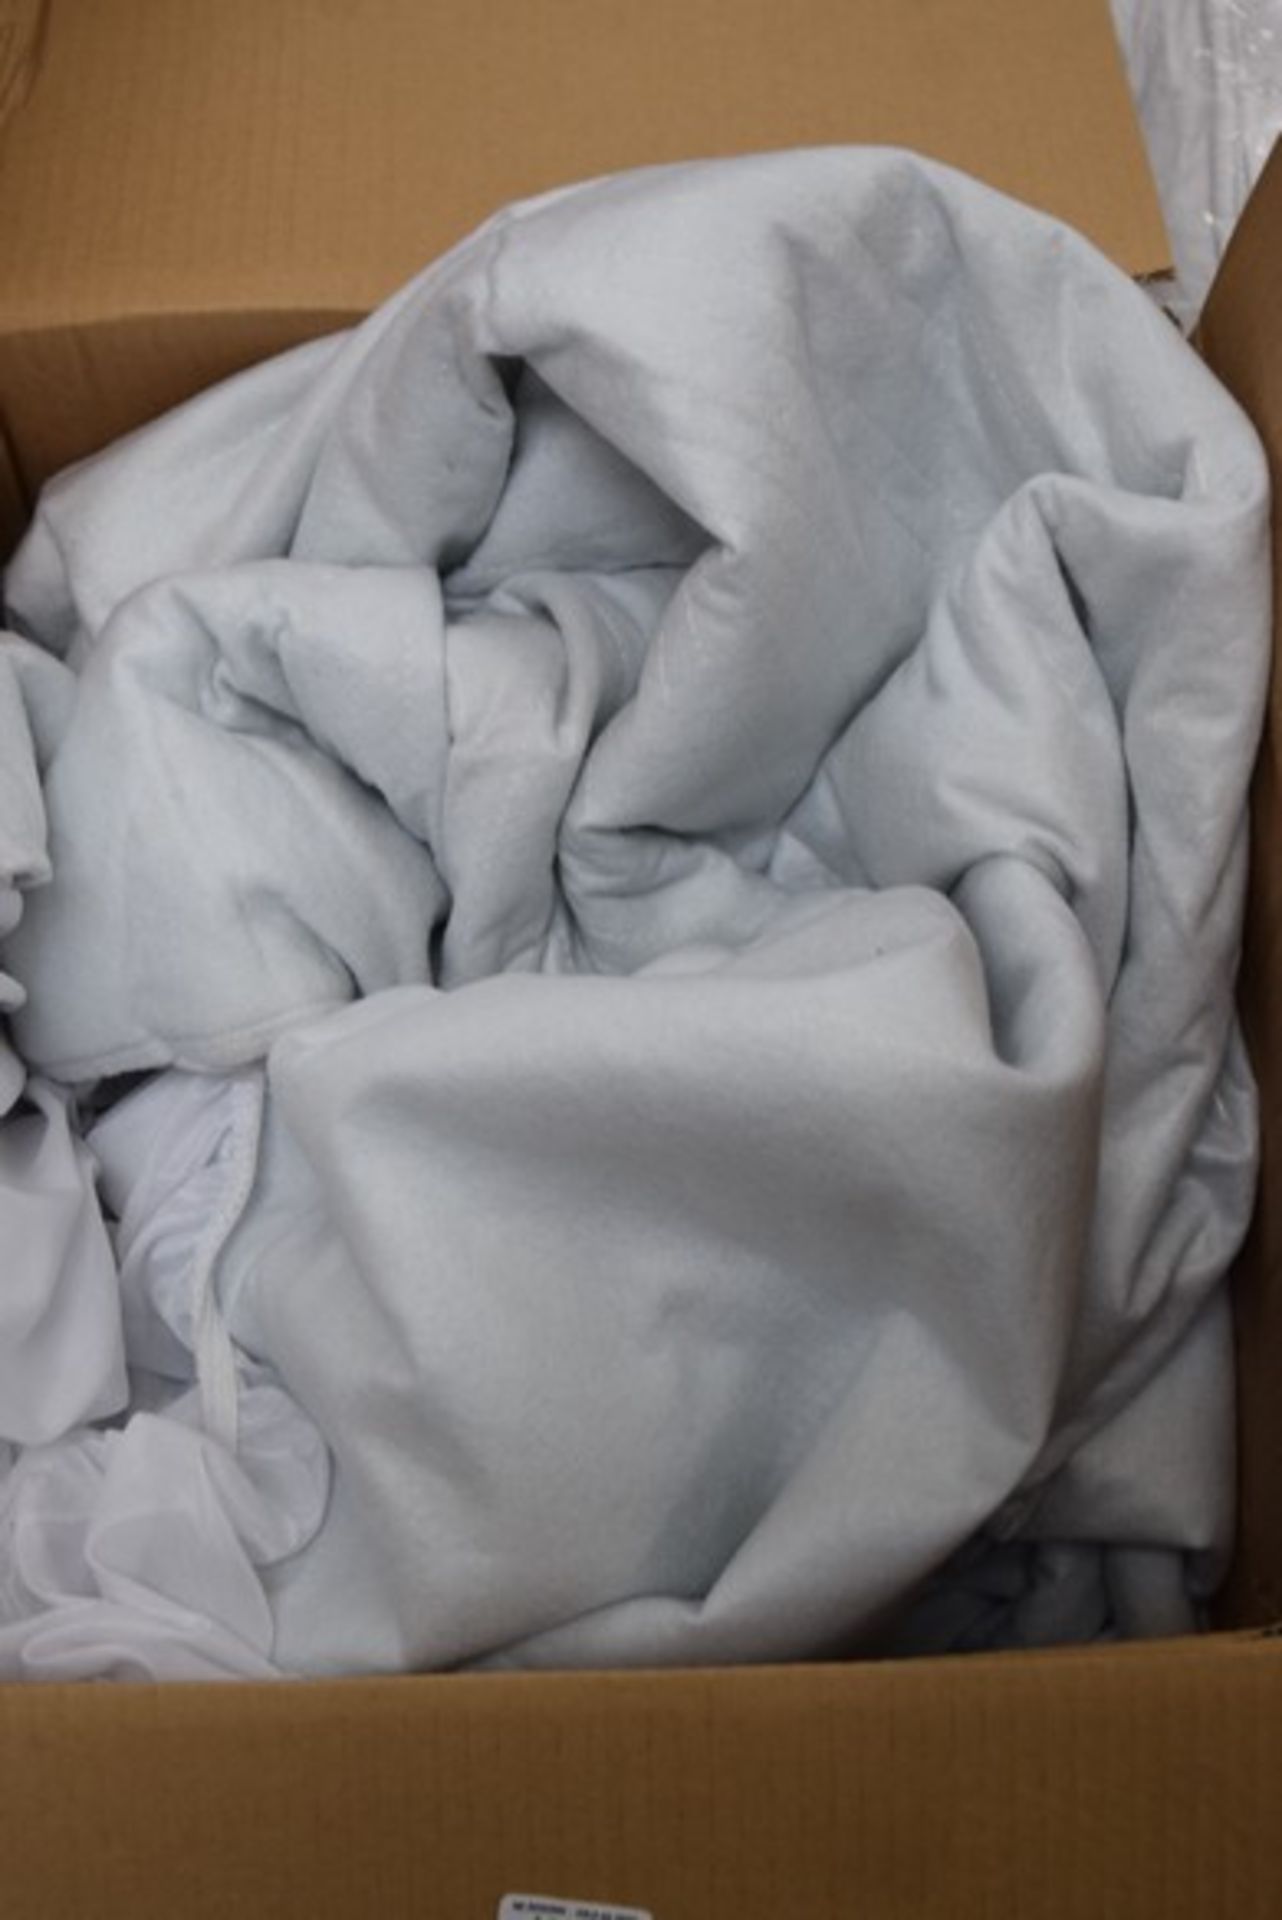 1 x DREAMLAND INTELLIHEAT ELECTRIC OVER BLANKET (UNKNOWN SIZE) RRP £40 *PLEASE NOTE THAT THE BID